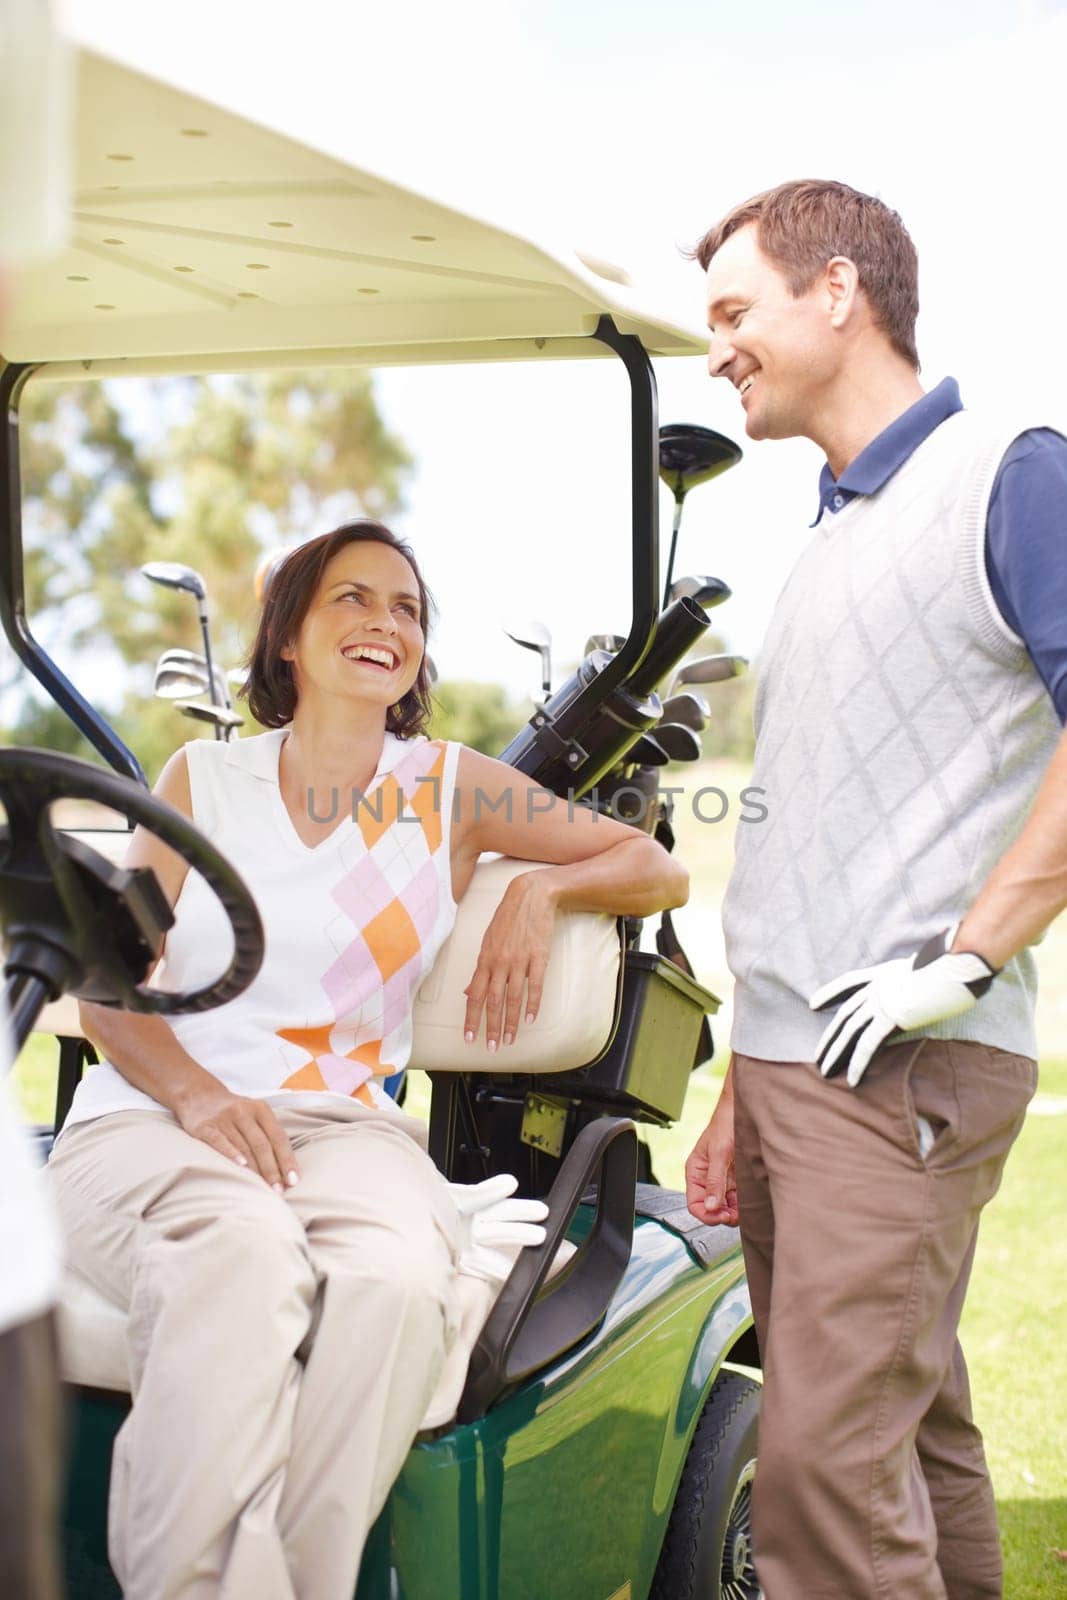 Taking a moment to relax between holes. Smiling woman seated in a golf cart with her husband standing alongside her